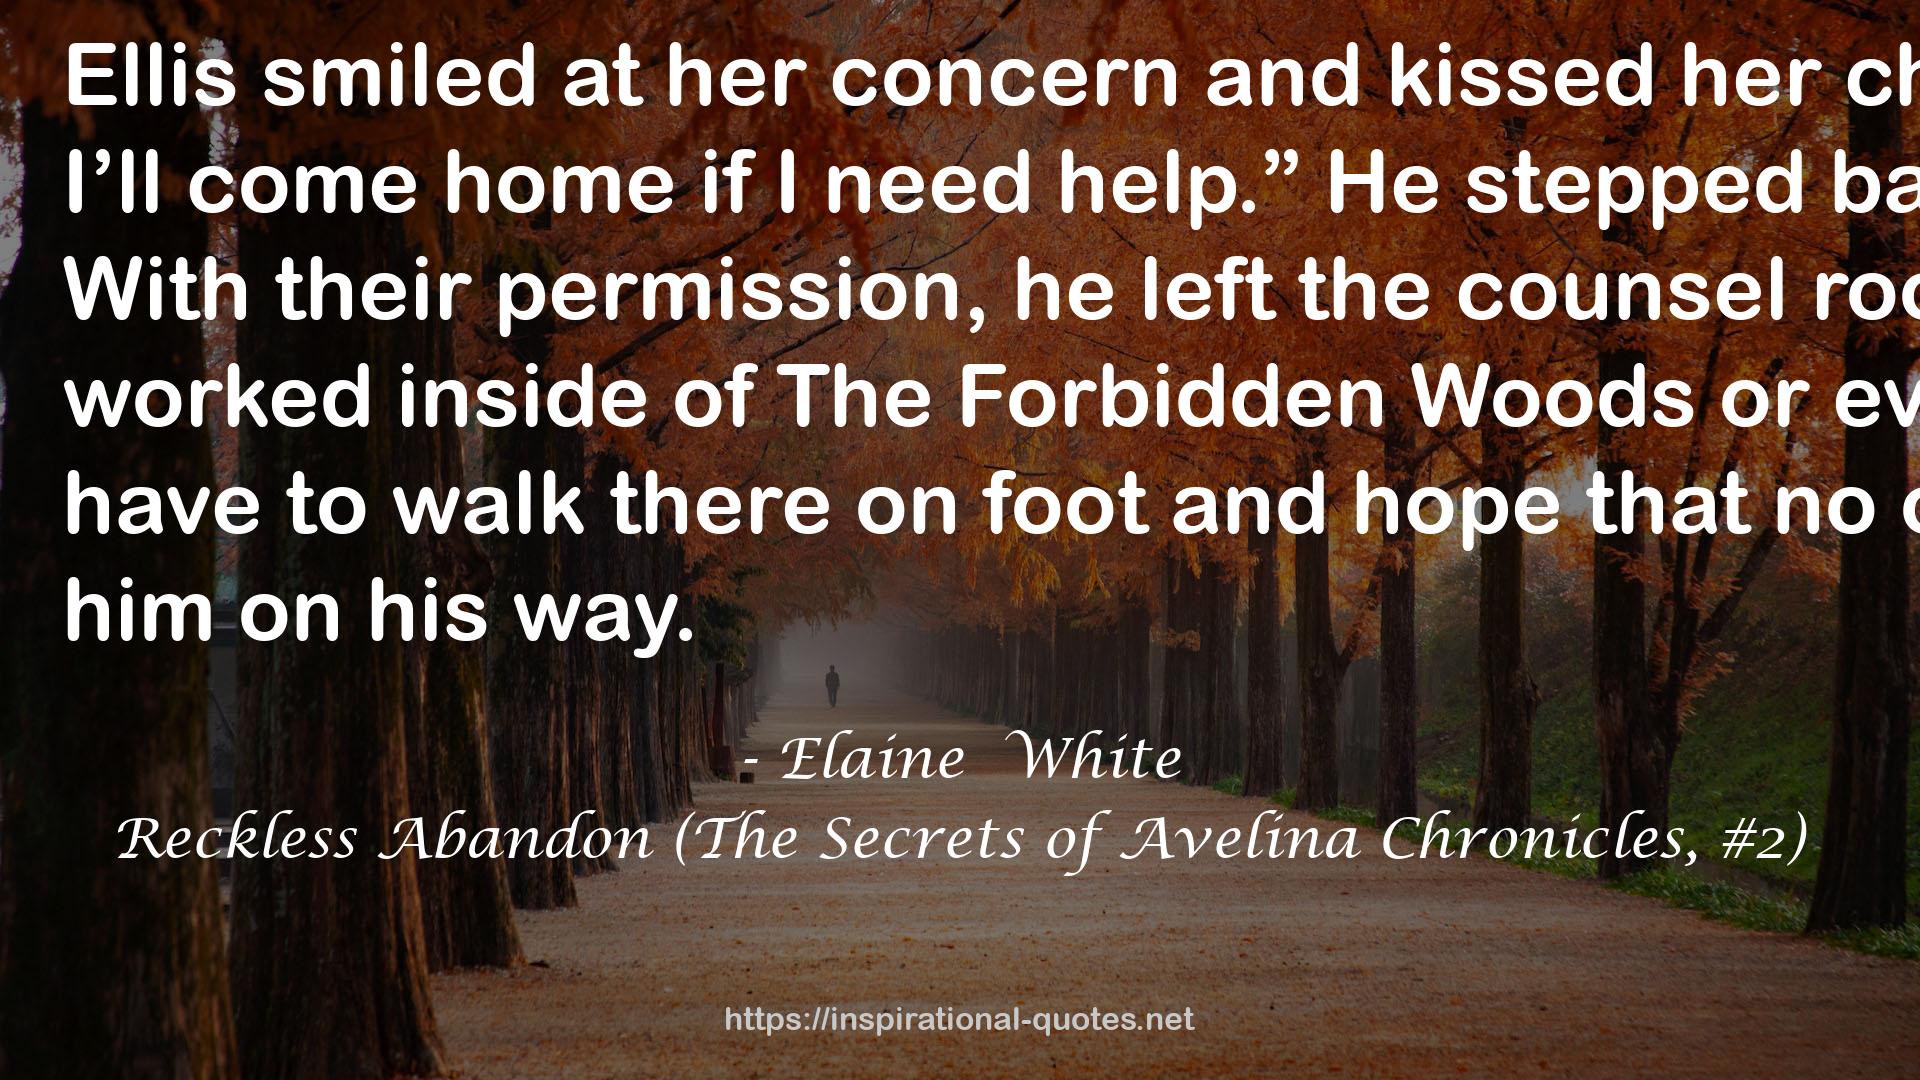 Reckless Abandon (The Secrets of Avelina Chronicles, #2) QUOTES